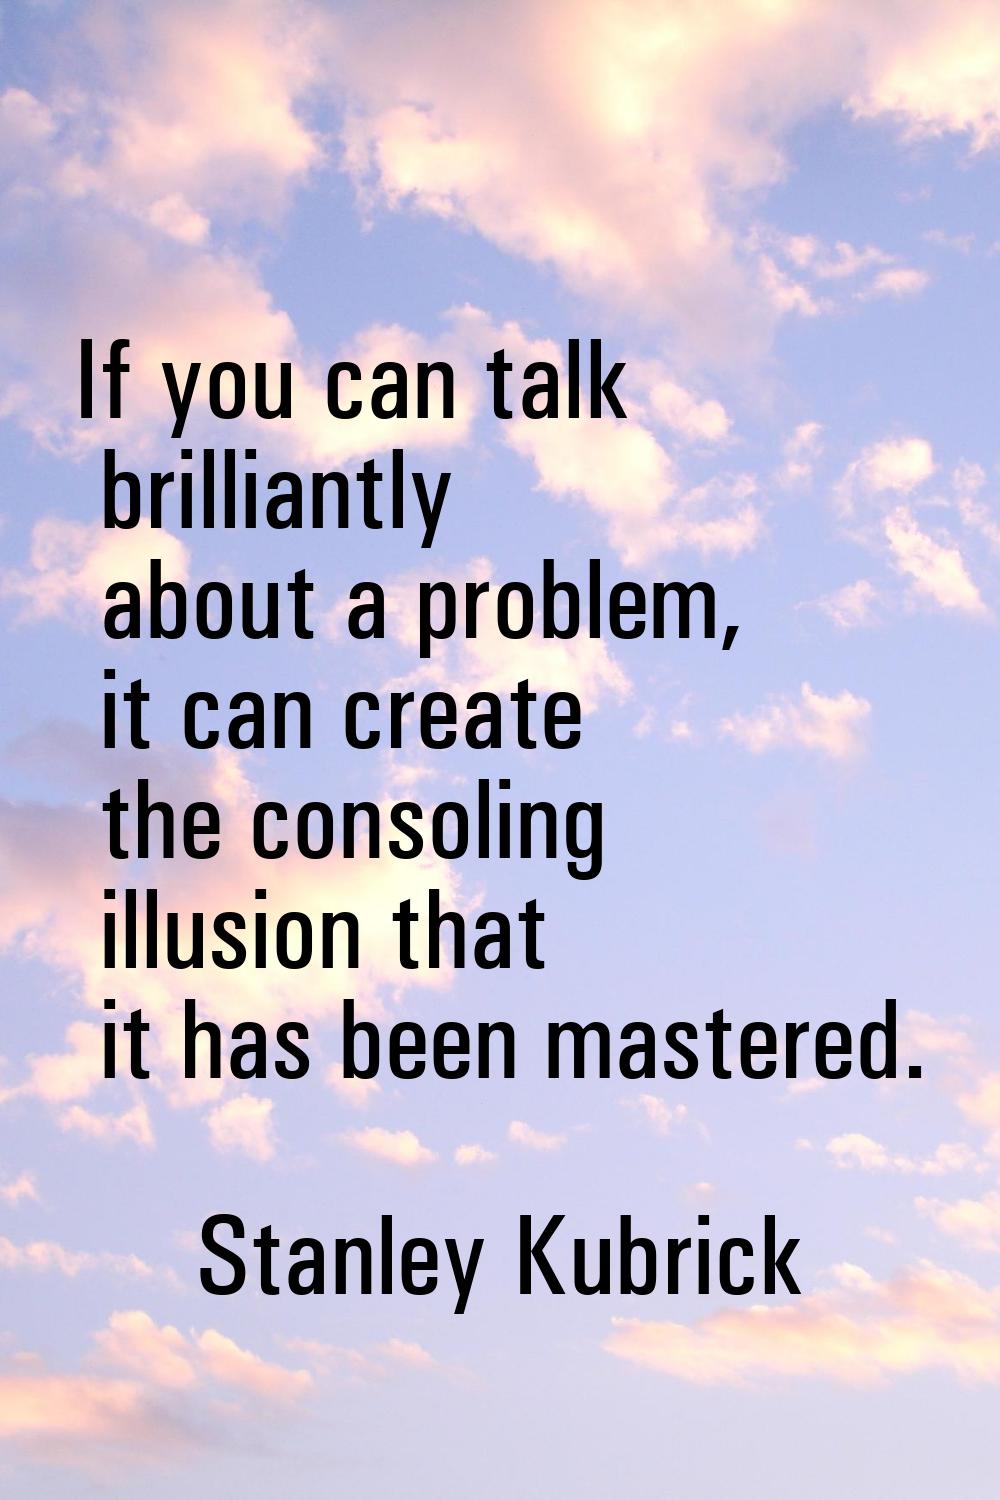 If you can talk brilliantly about a problem, it can create the consoling illusion that it has been 